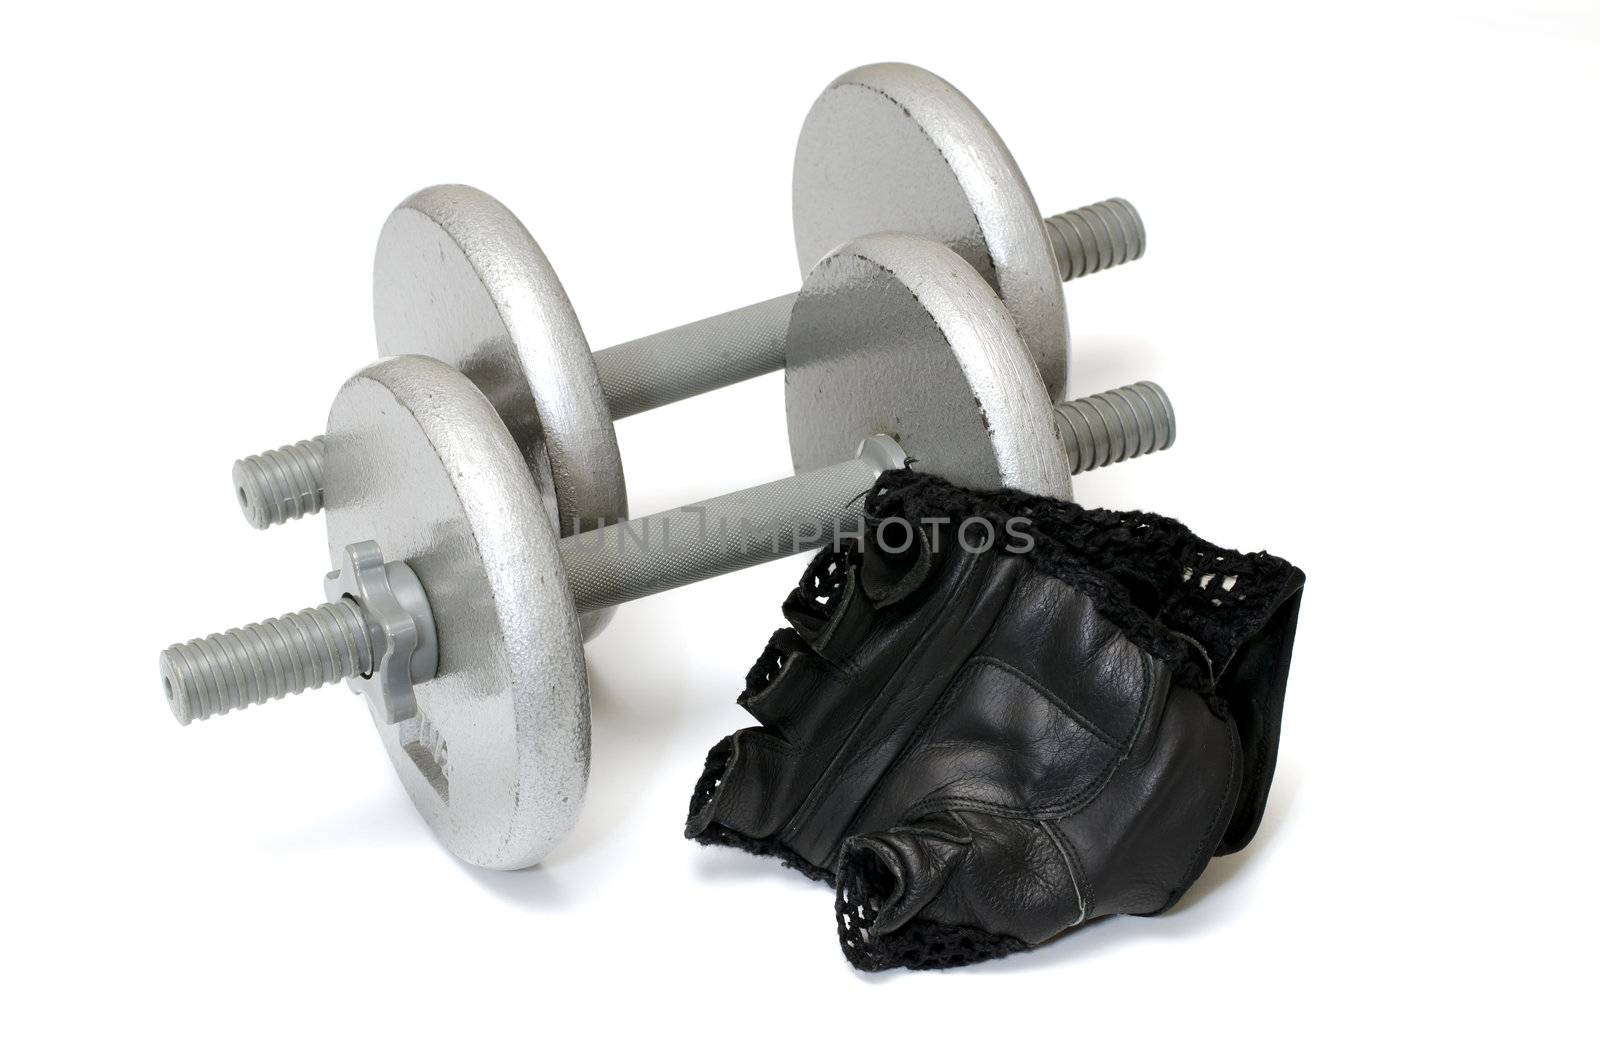 Dumbbells and Workout Gloves by dehooks